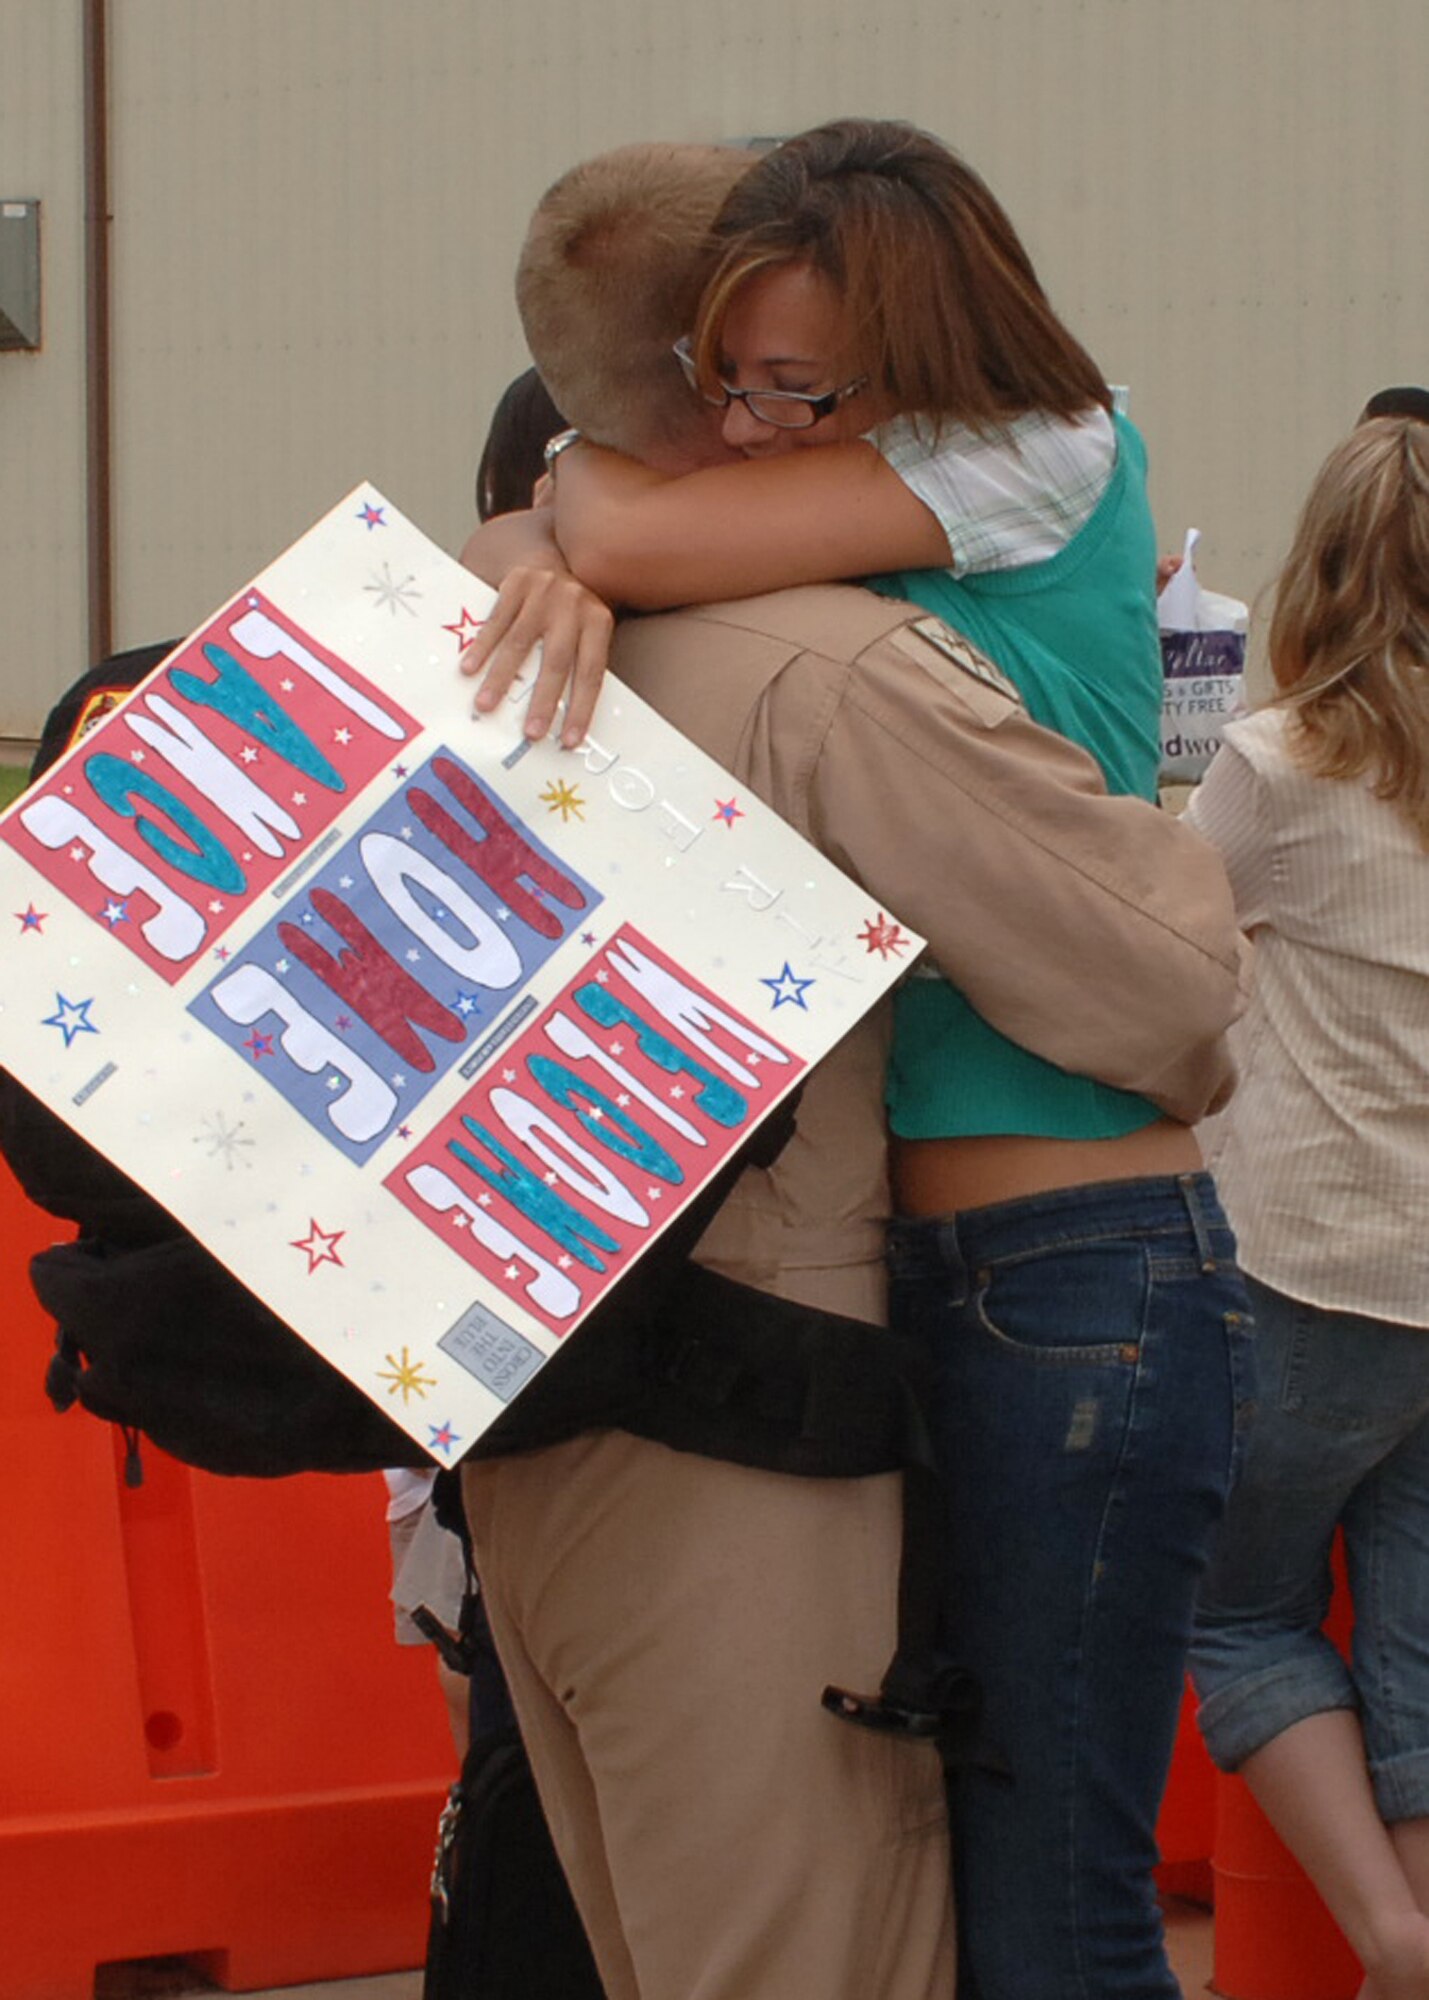 Ashley Dorenkamp welcomes back her husband, Capt. Lance Dorenkamp, a co pilot from the 40th Airlift Squadron, June 20. Captain Dorenkamp arrived back home after being deployed for more than four months supporting Operation Enduring Freedom. (U.S Air Force photo by Airman 1st Class Felicia Juenke)